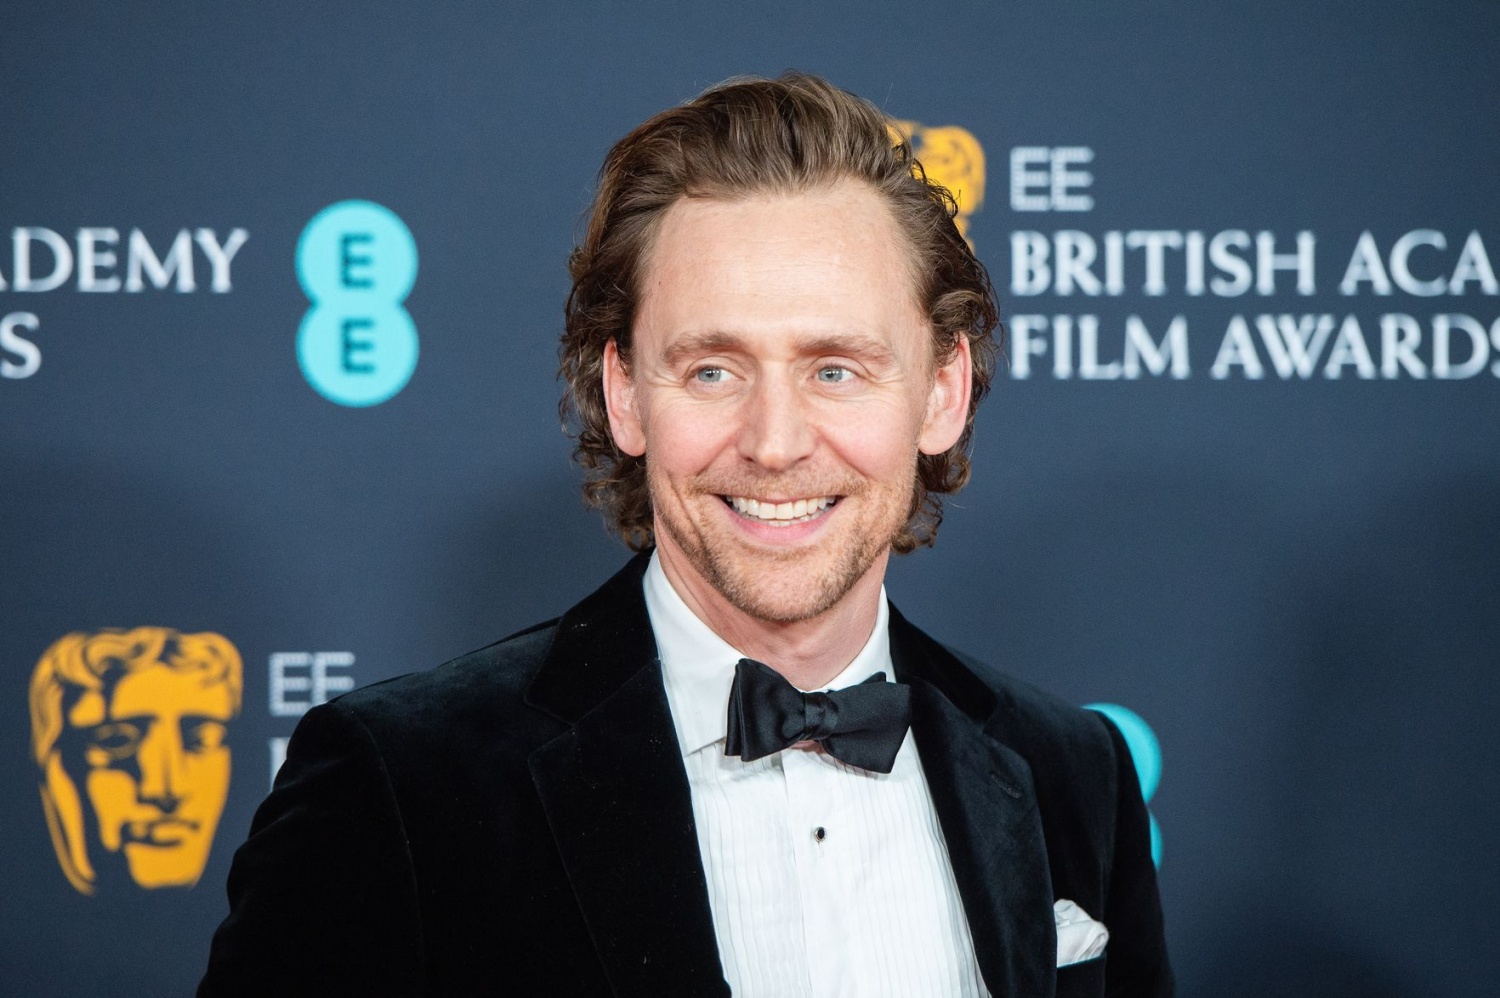 Tom Hiddleston attends the EE British Academy Film Awards 2022 dinner at The Grosvenor House Hotel on March 13, 2022 in London, England. (Photo by Joseph Okpako/WireImage)